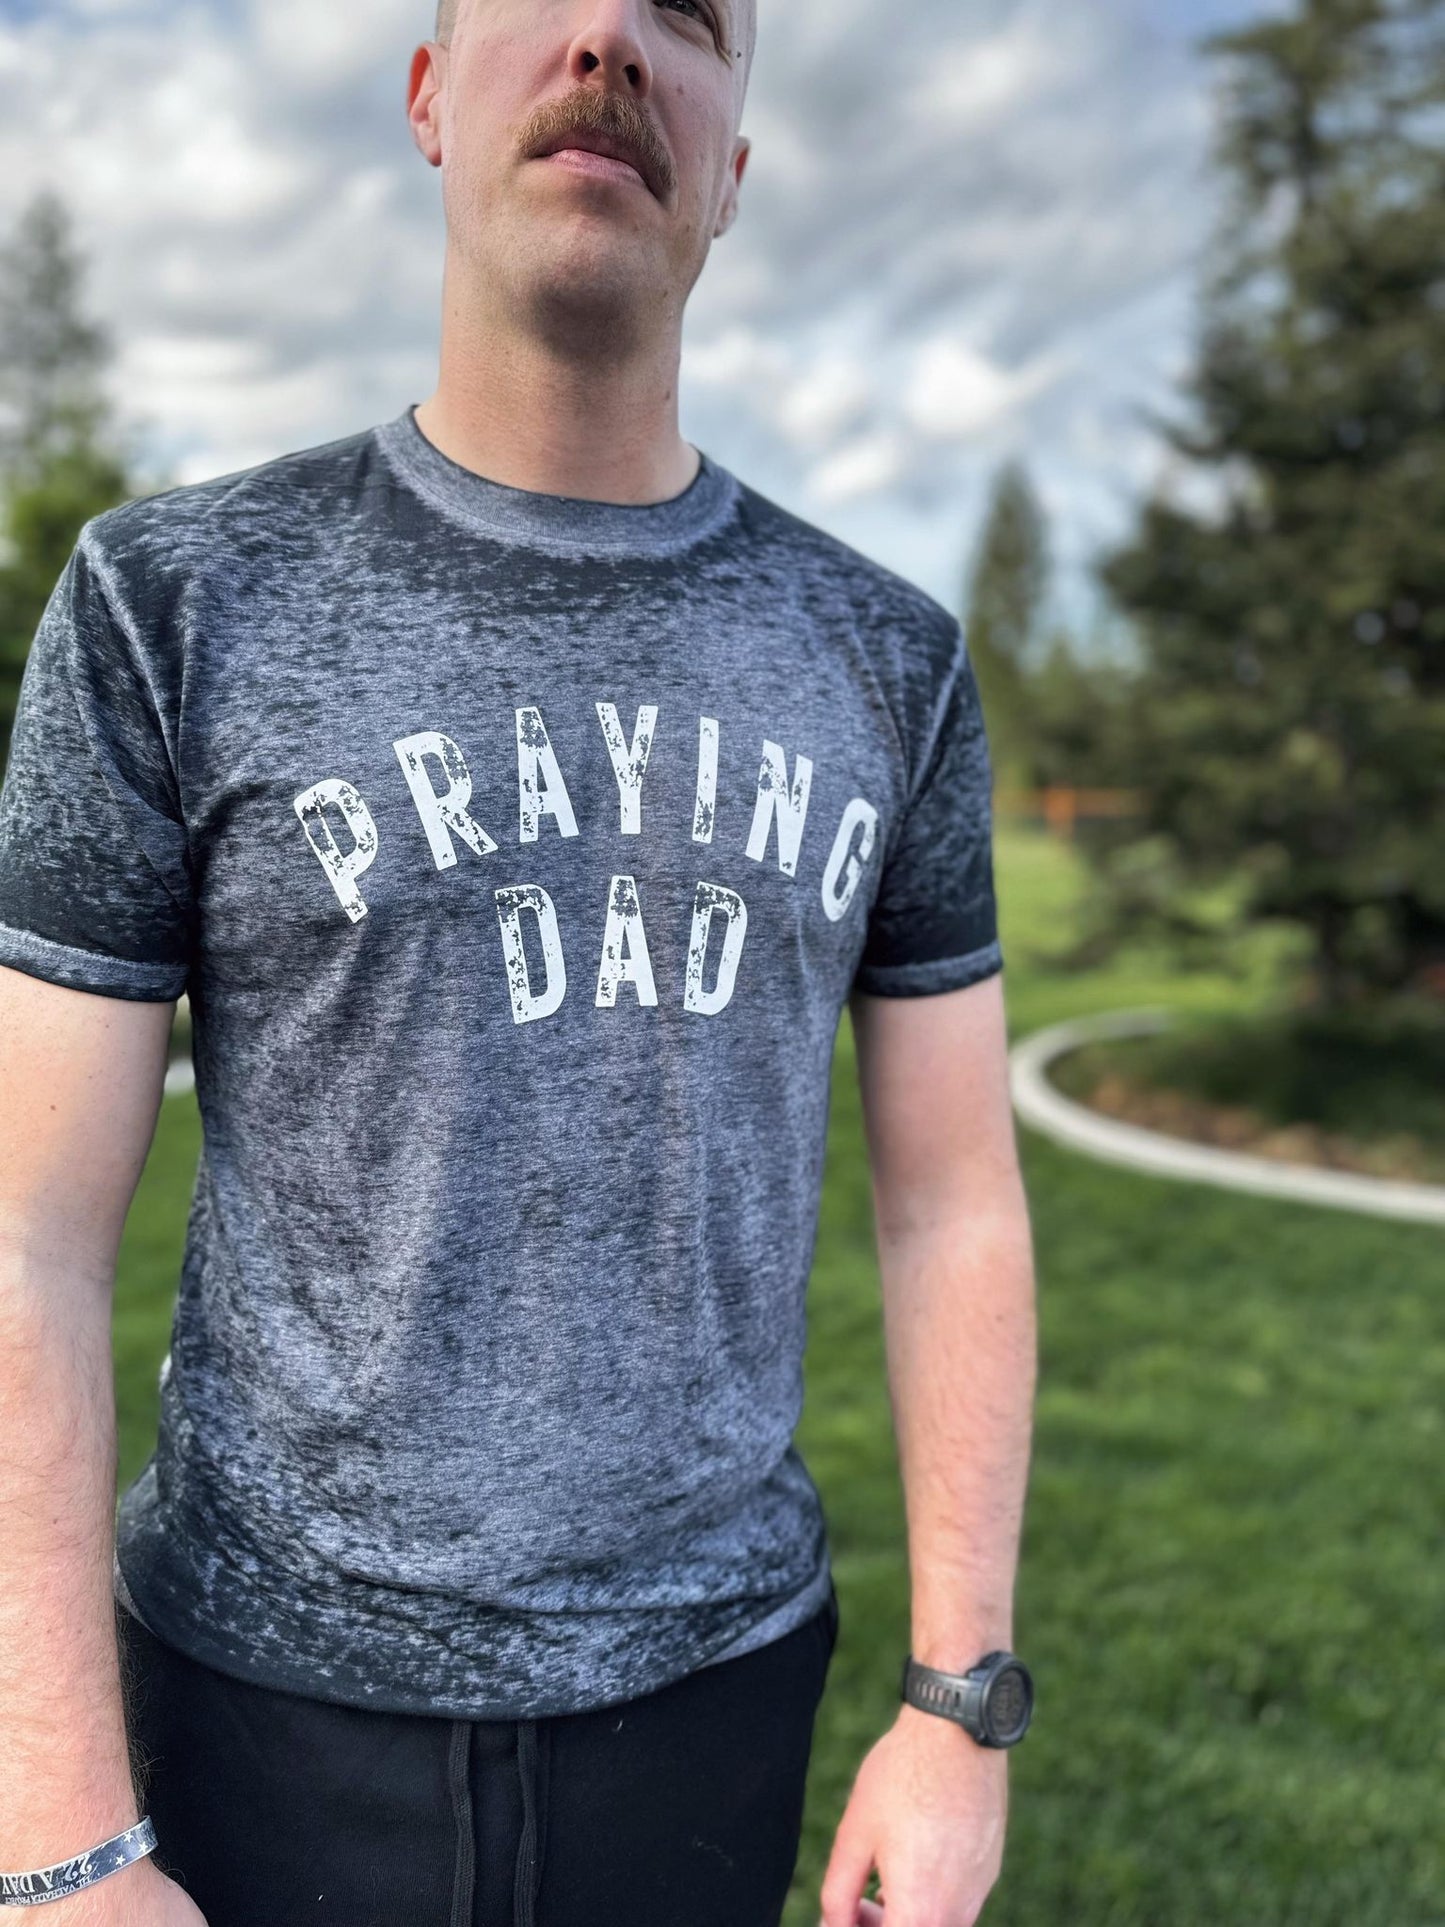 Praying Dad Burnout Graphic Tee **LIMITED LAUNCH**